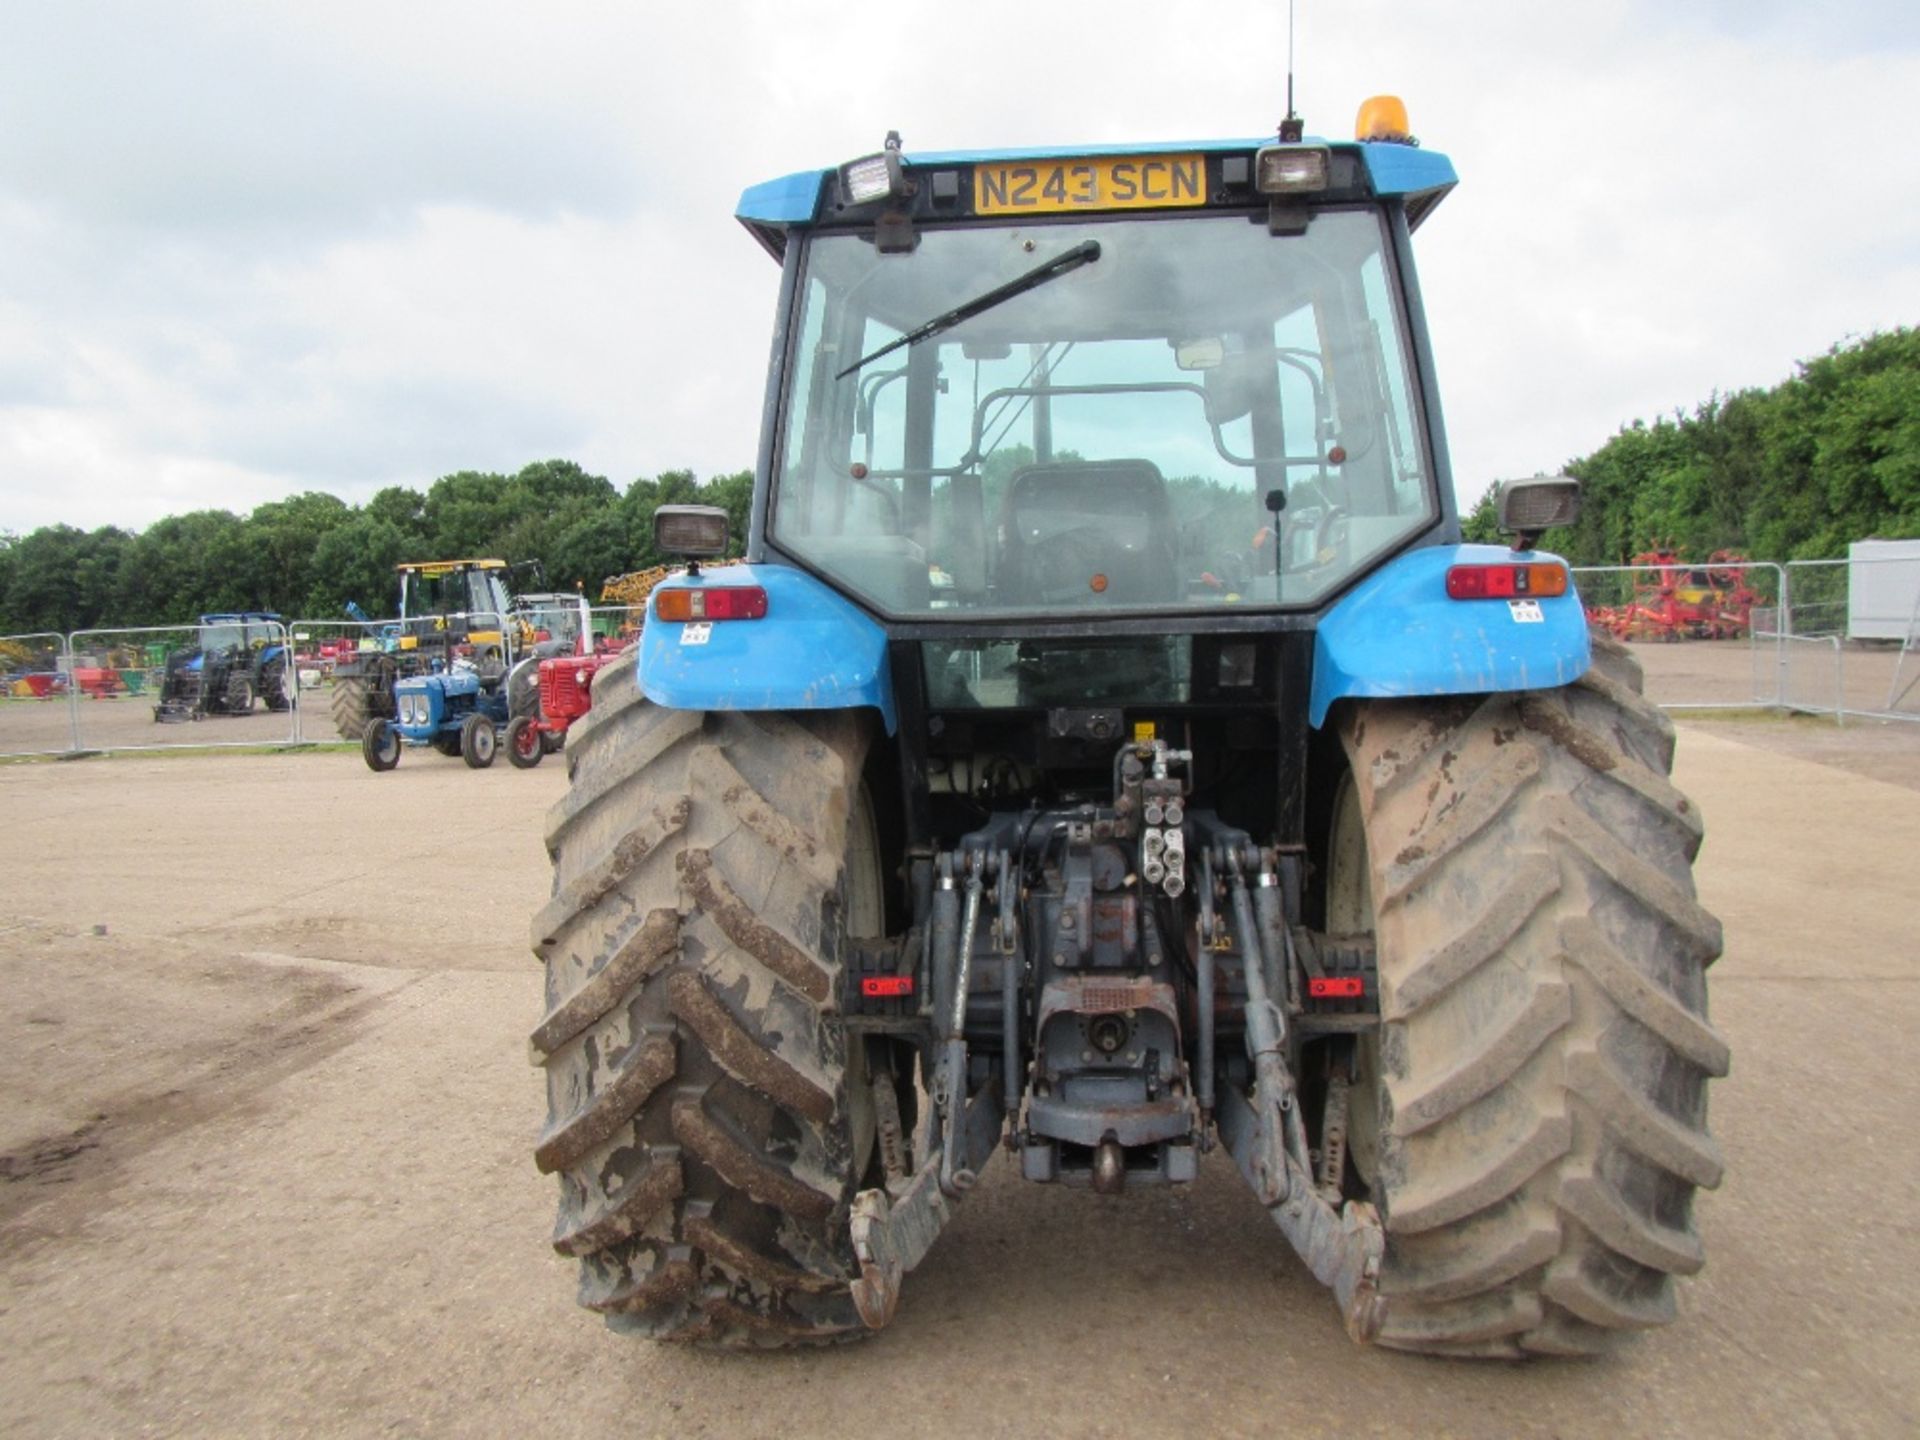 New Holland 8340 SLE 4wd Tractor Reg. No. N243 SCN Ser. No. 025324B - Image 6 of 20